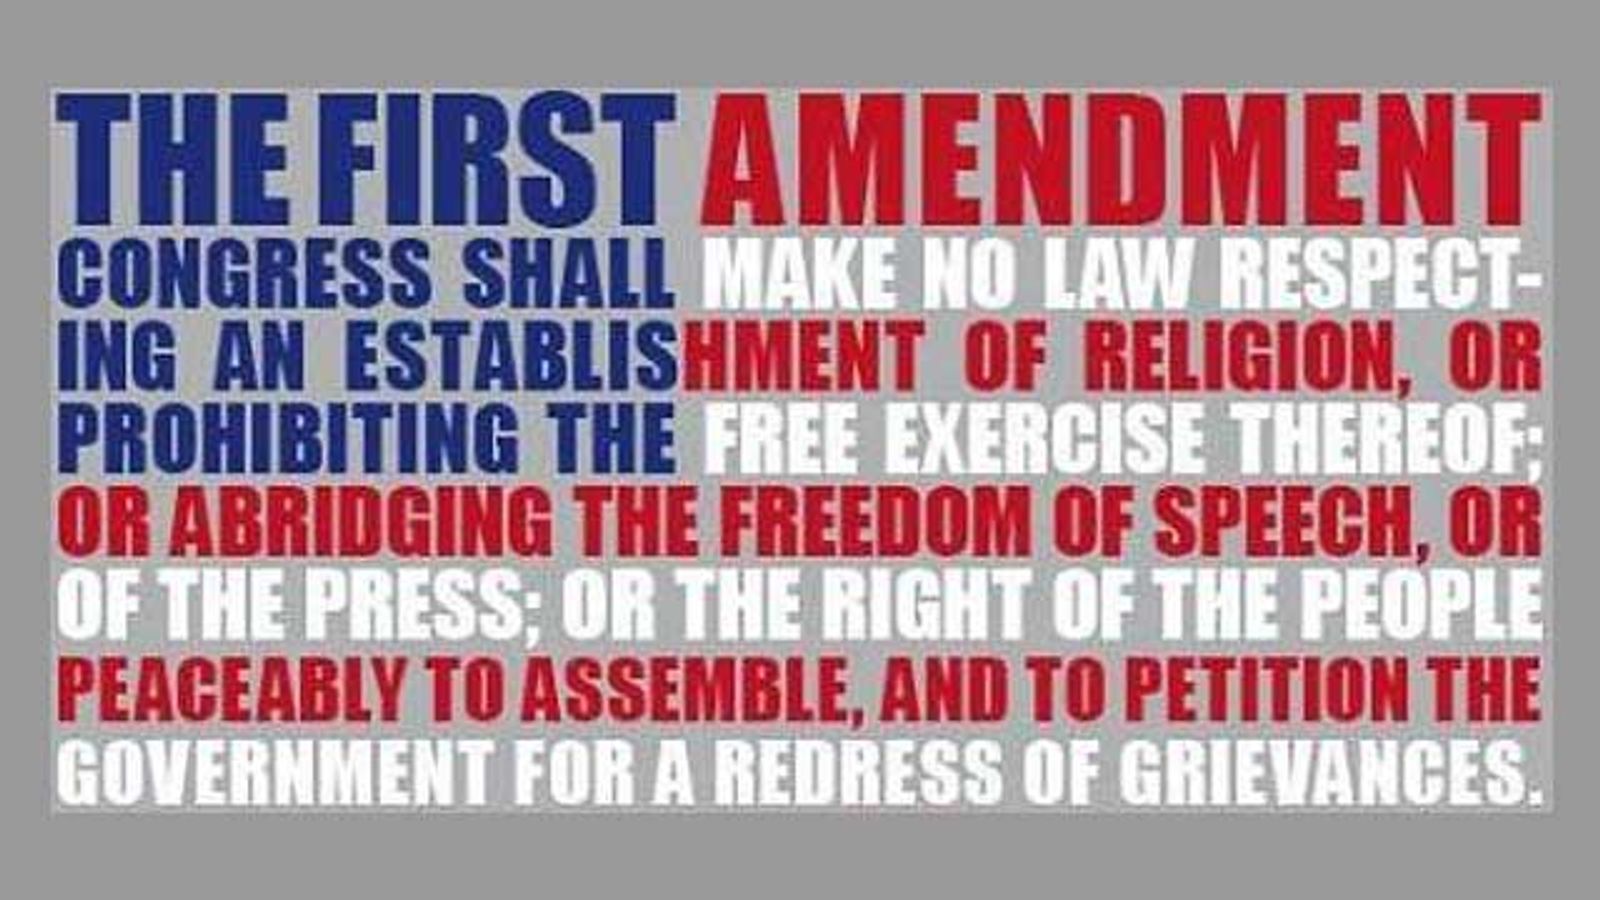 Sometimes First Amendment Rights Aren't Pretty... But Needed